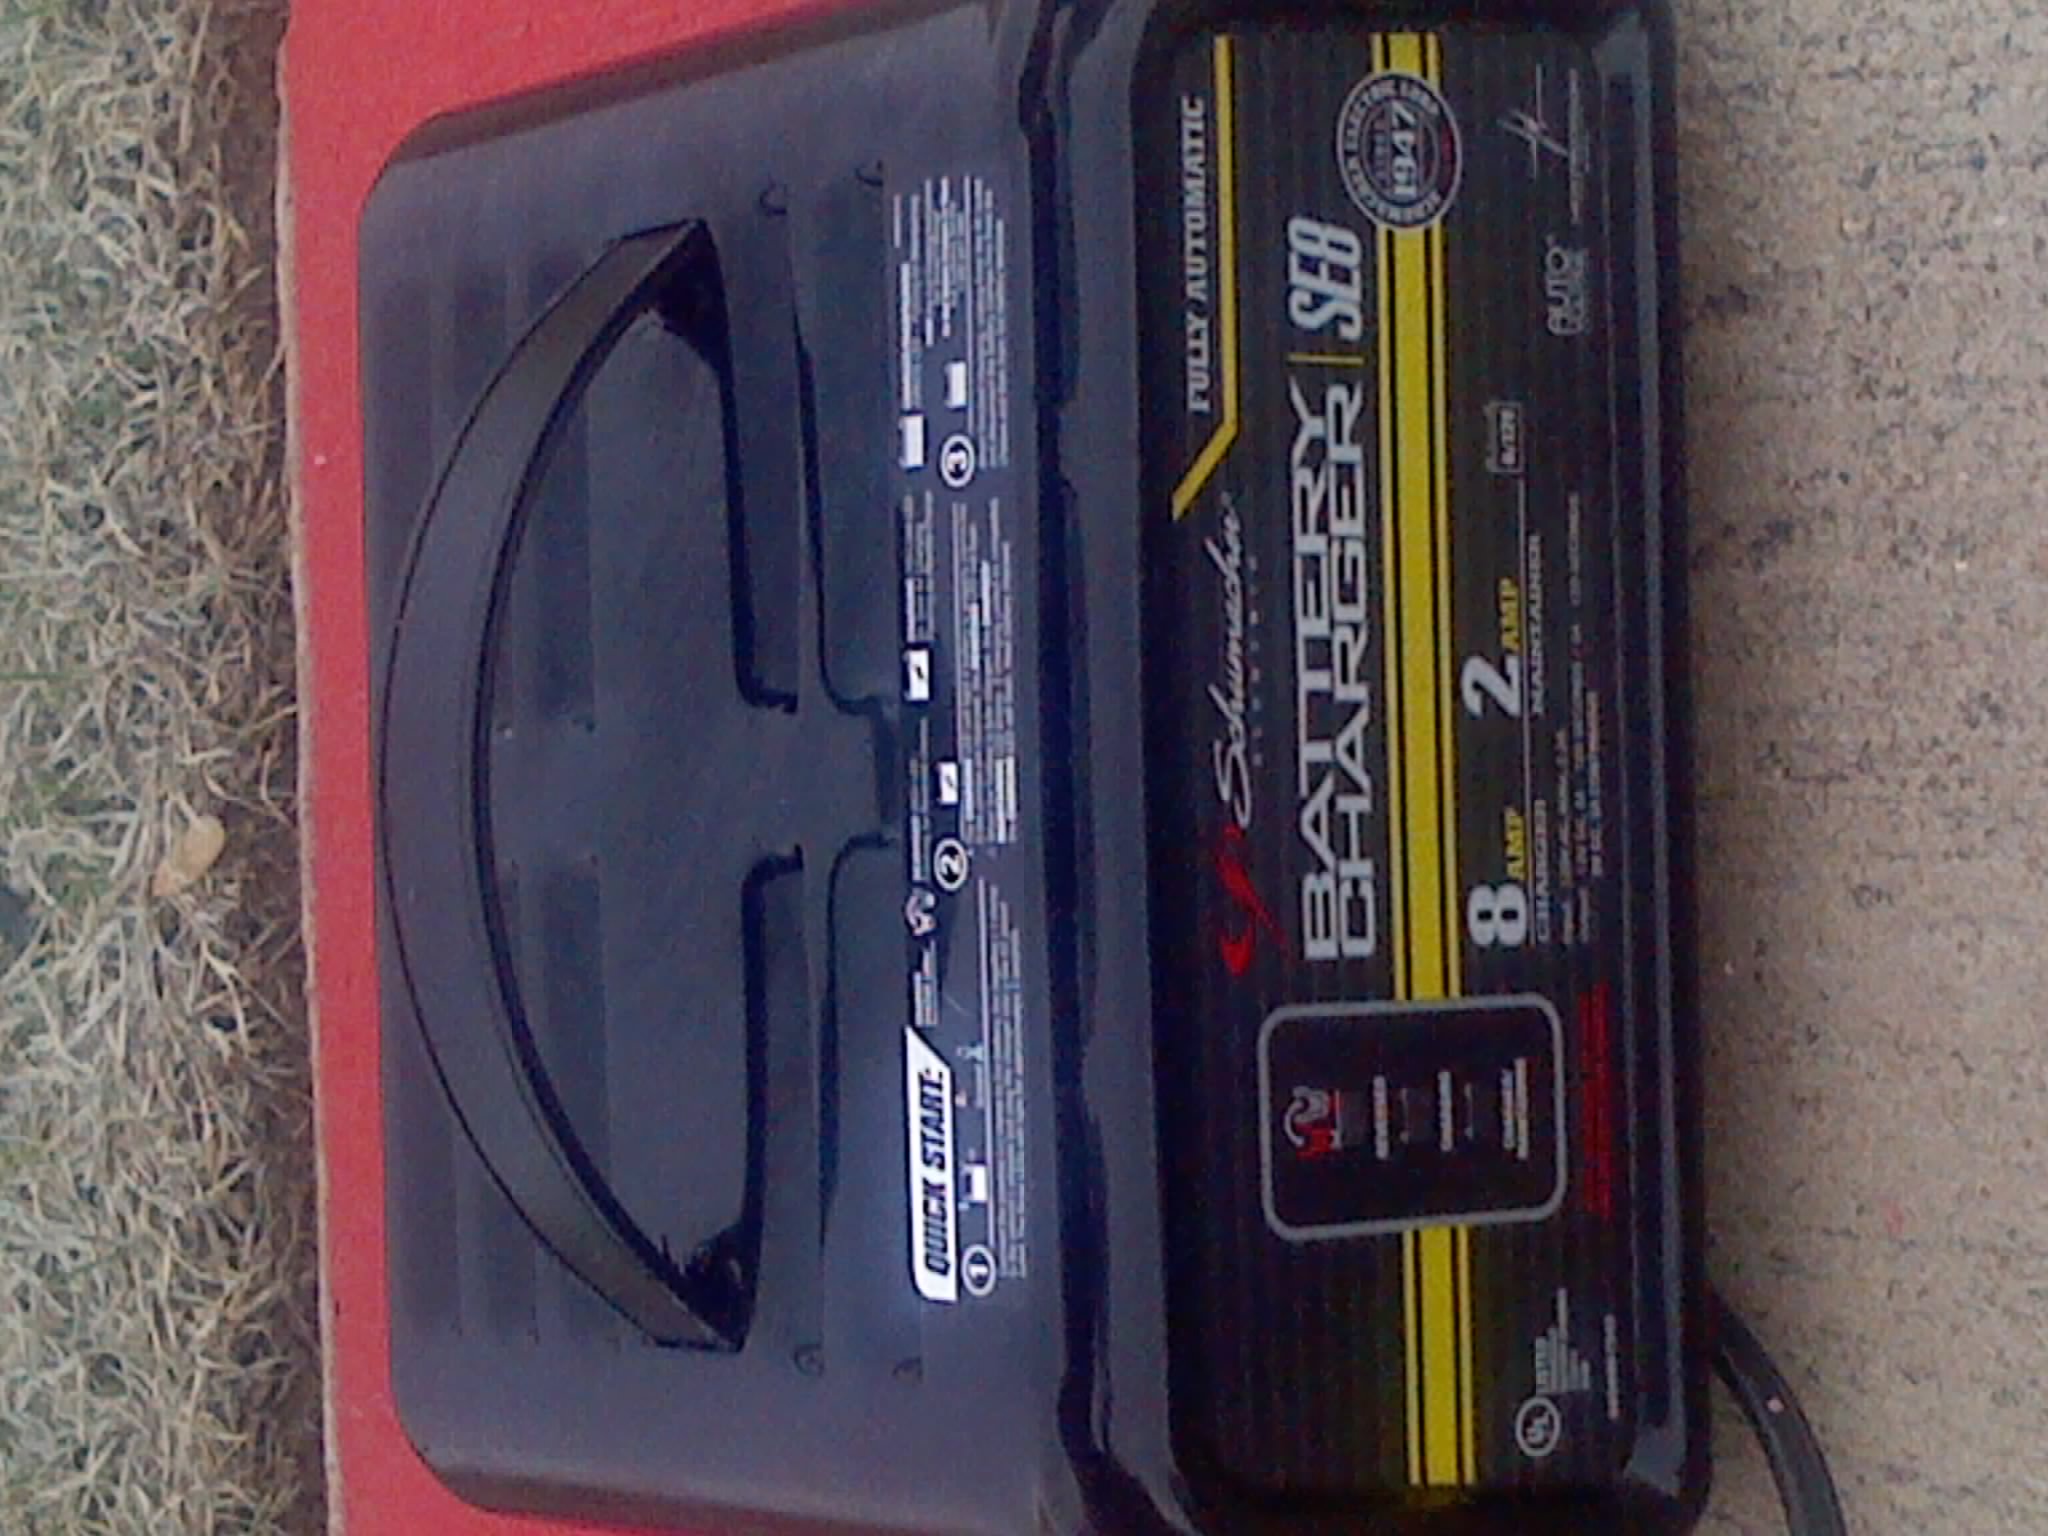 car battery charger in box